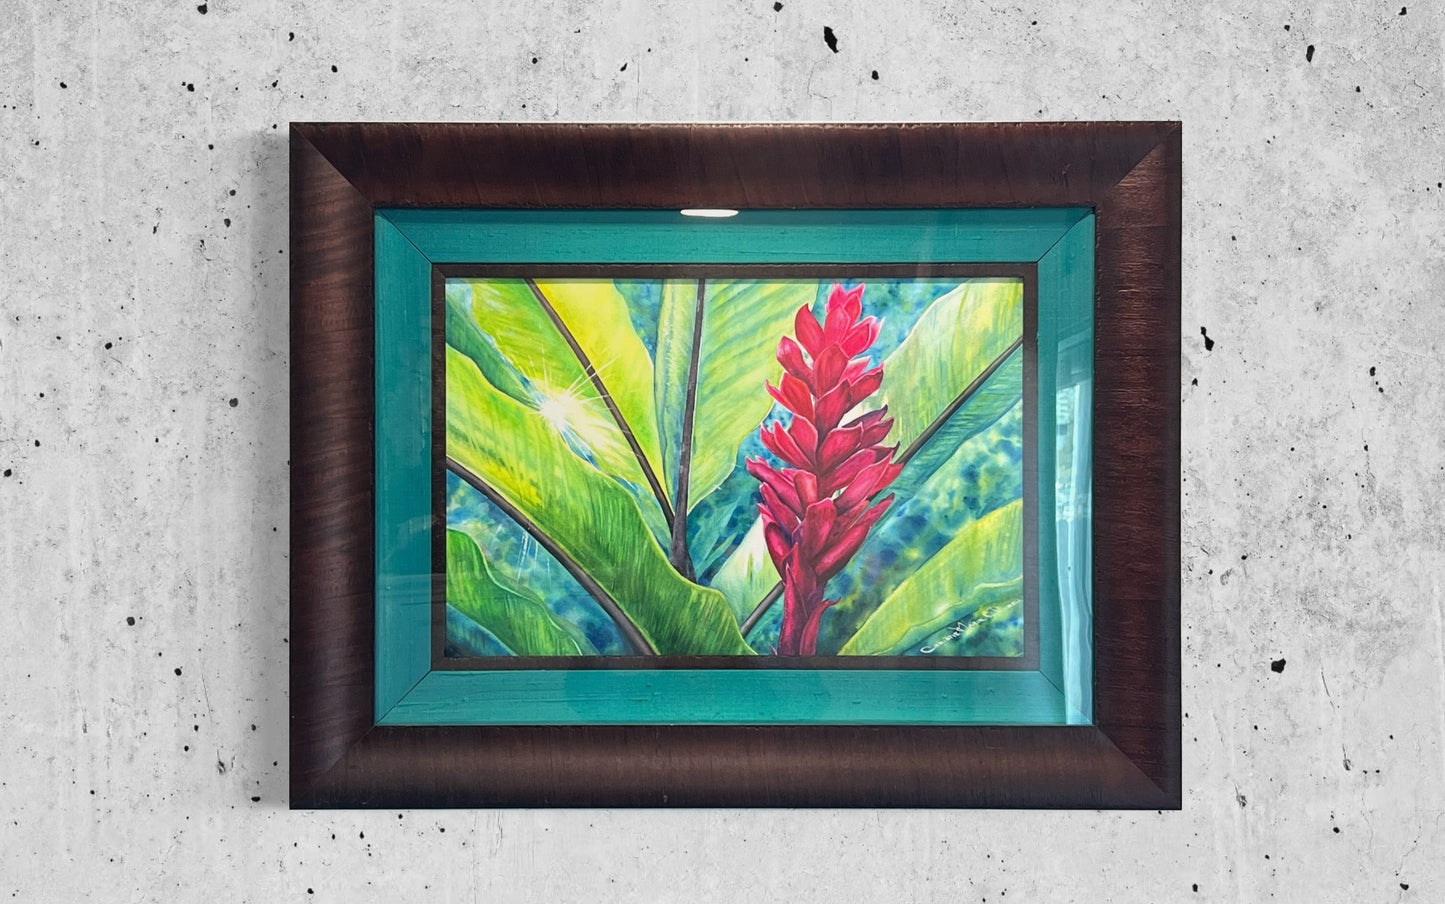 Original Watercolor Painting signed and Framed “Tropical Flame” Hawaiian Red Ginger art by artist © Christie Marie